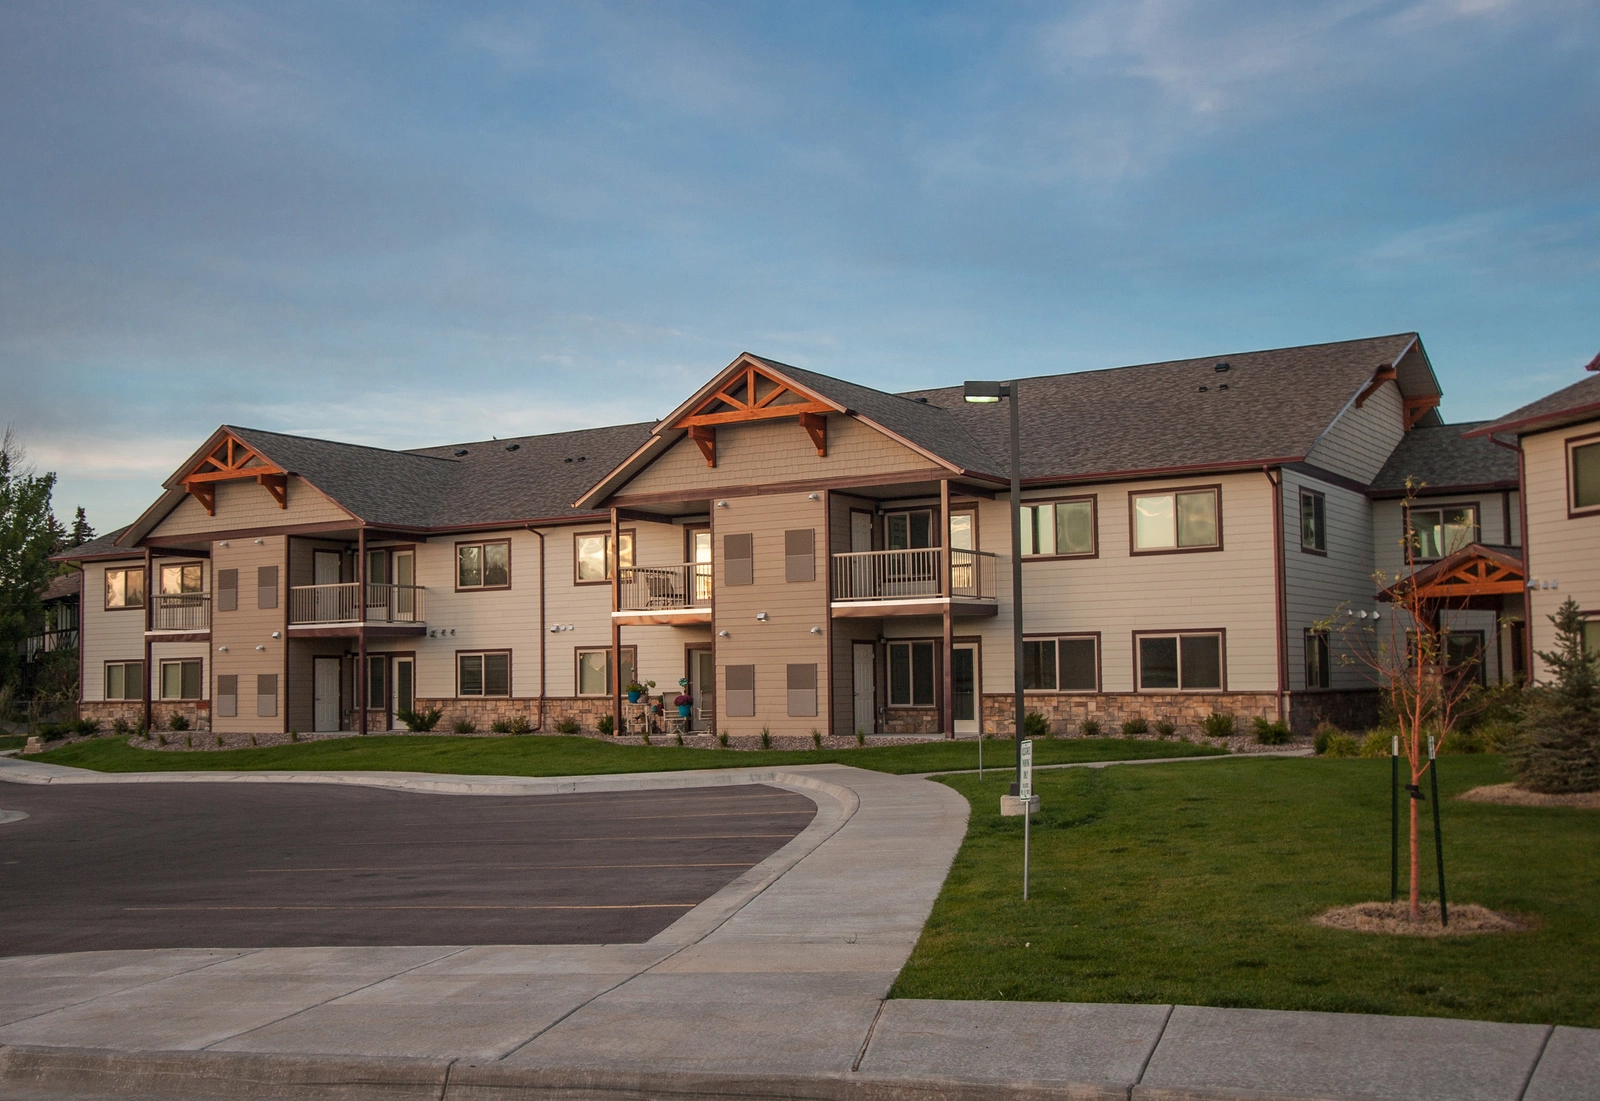 This 56-unit affordable senior housing project is located at 3001 15th Avenue So. on the campus of Benefis Health System in Great Falls, MT.